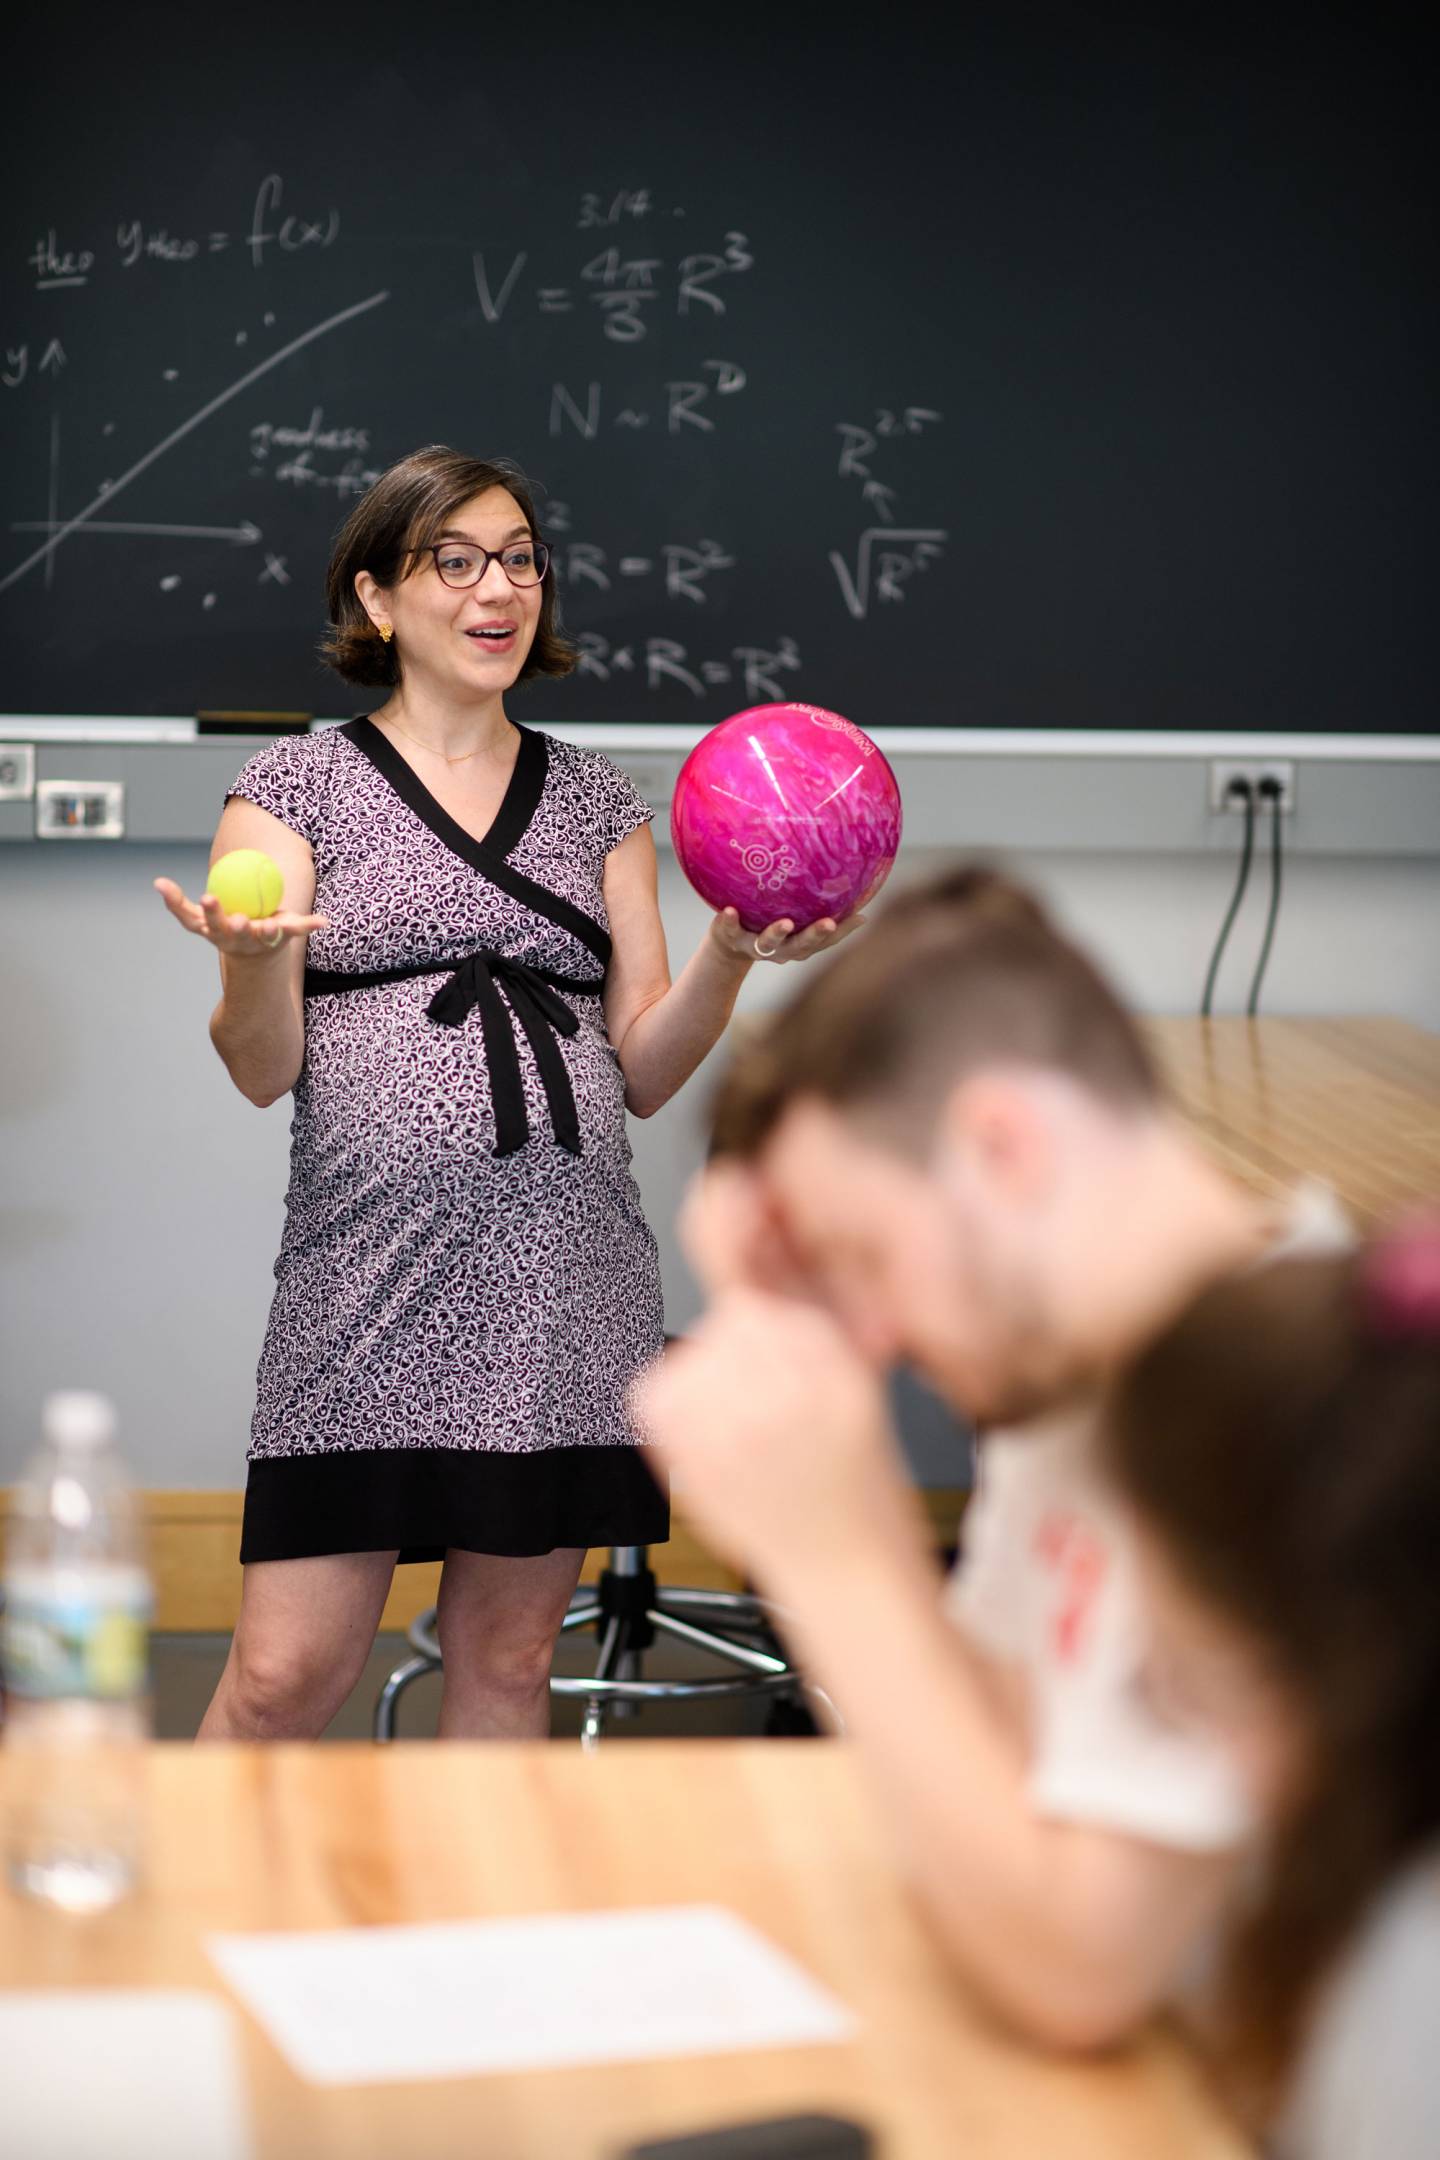 Katerina Visnjic standing in front of class holding a tennis ball and a bowling ball